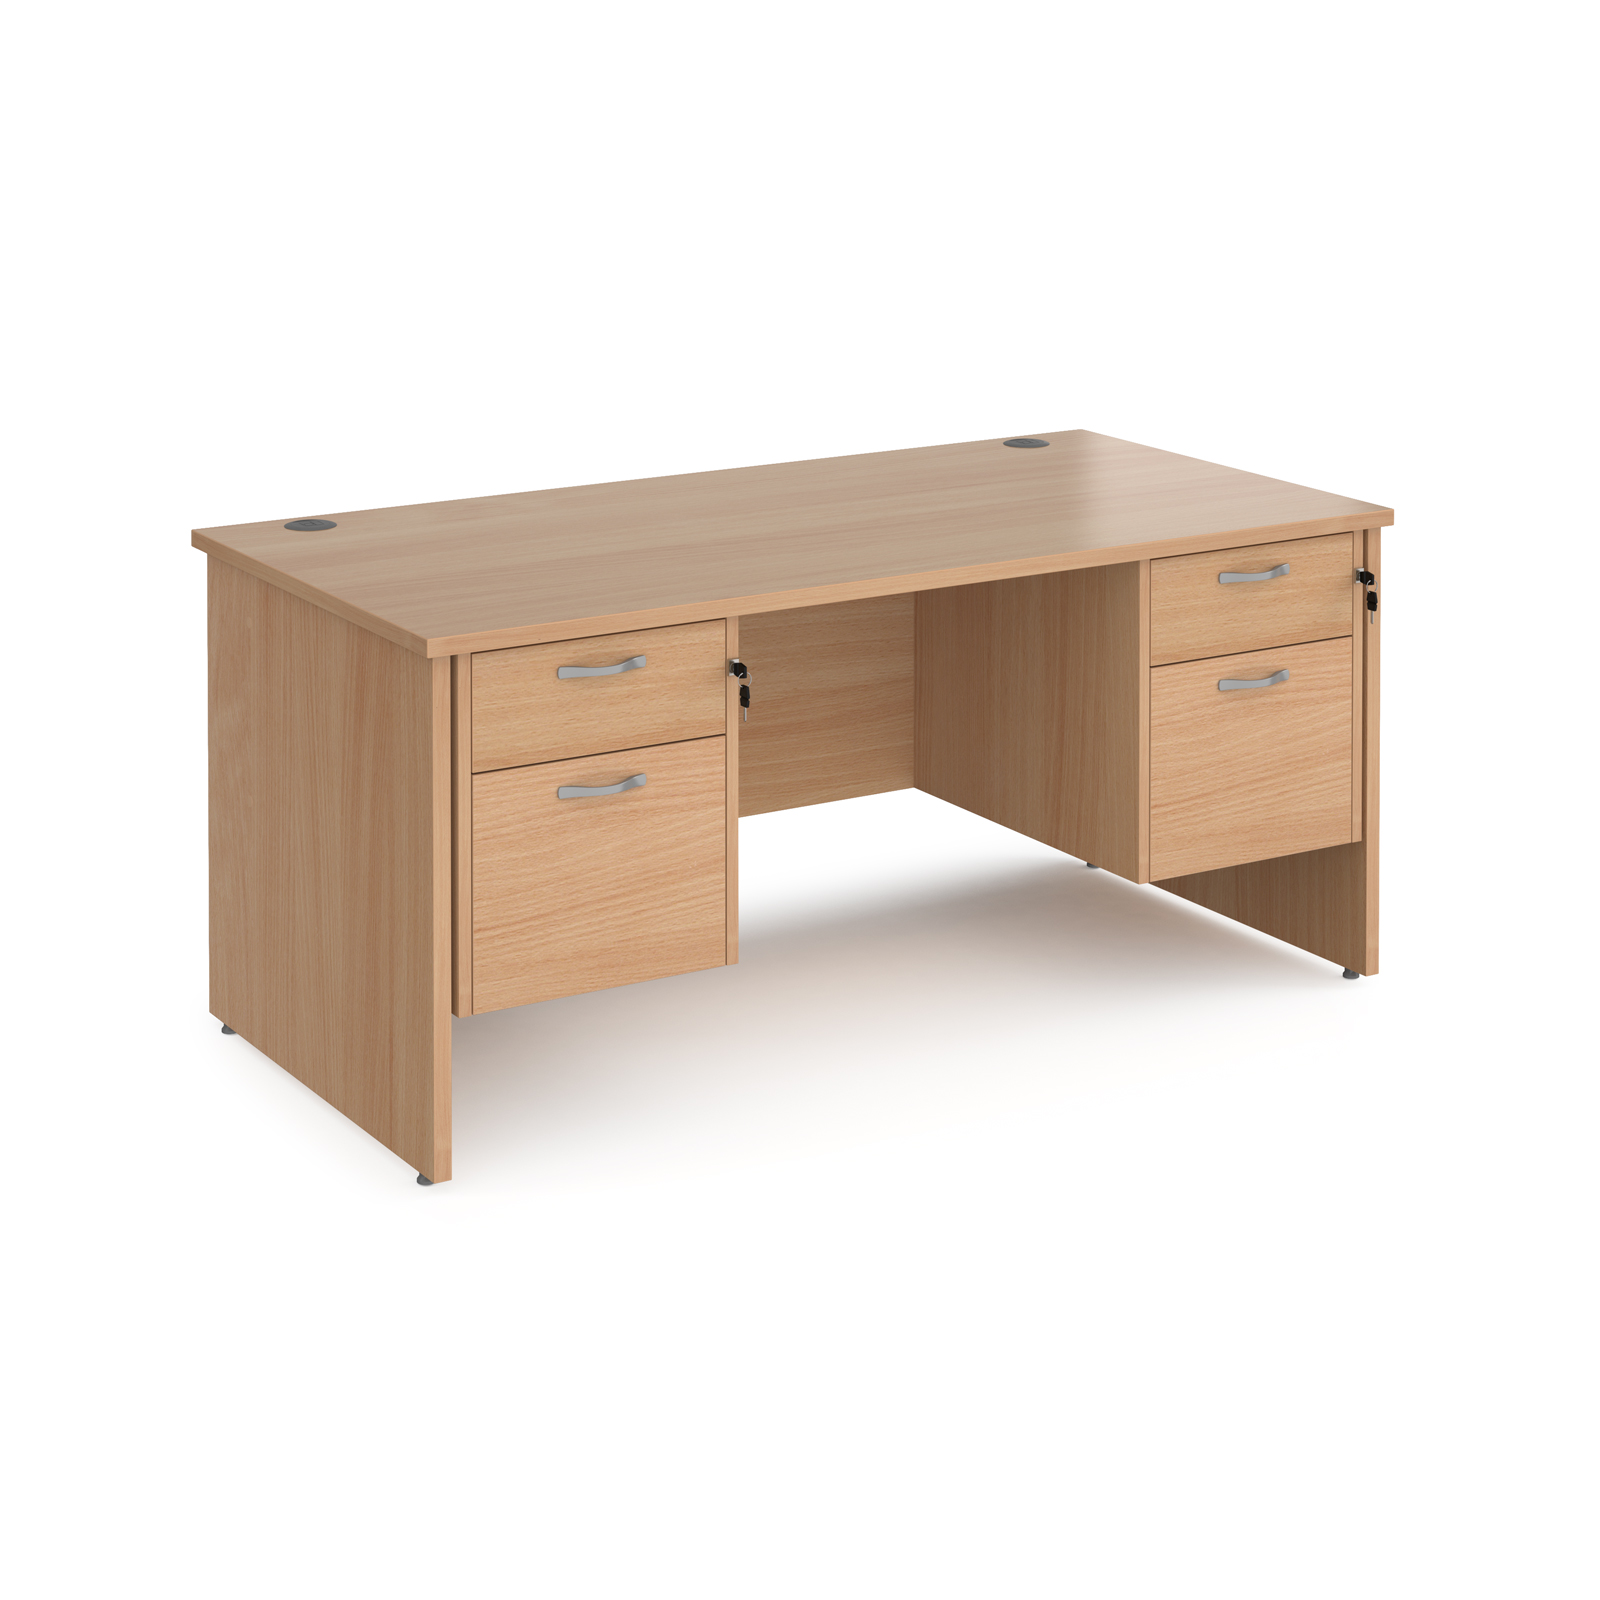 Maestro 25 straight desk 1600mm x 800mm with two x 2 drawer pedestals - beech top with panel end leg